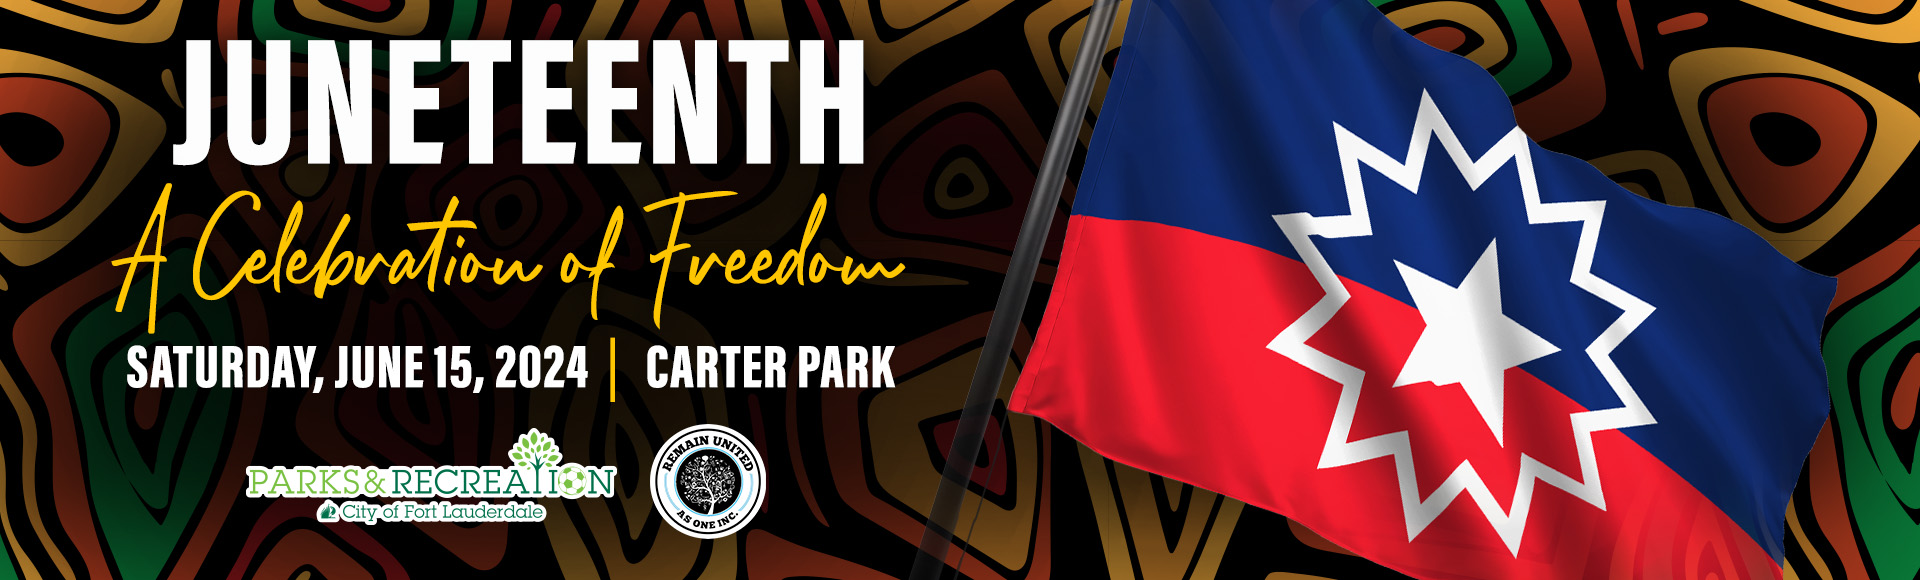 Juneteenth. A celebration of freedom. Saturday, June 15, 2024. Carter Park. Parks logo. Juneteenth red and blue flag waving on a red, yellow, green, and black pattern background.